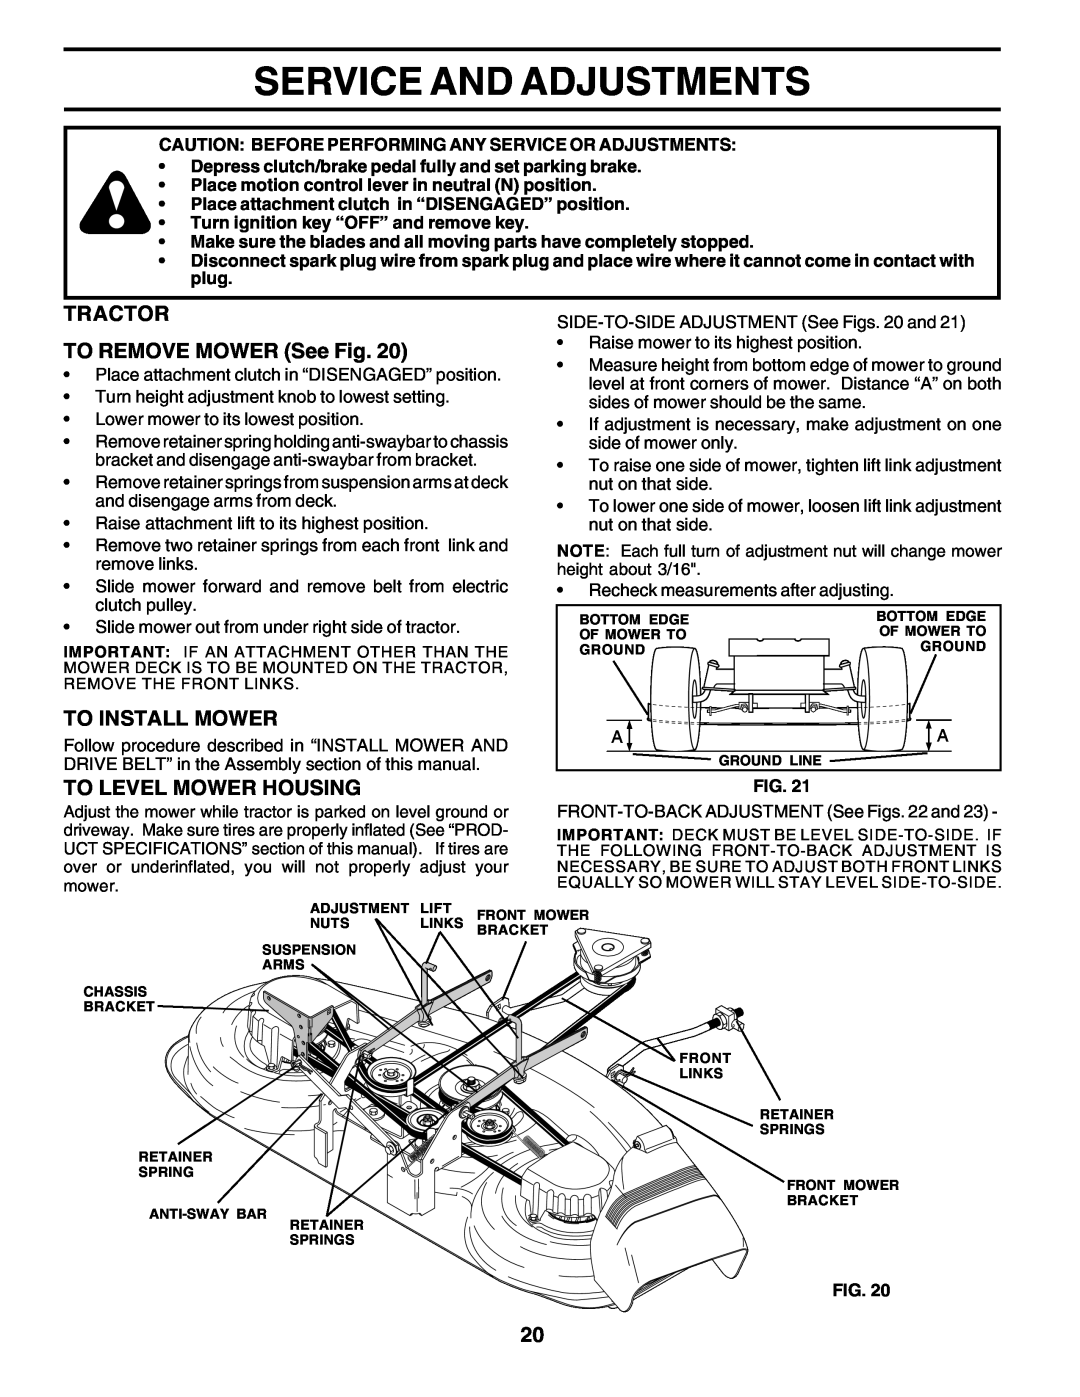 Poulan 177271 Service And Adjustments, TRACTOR TO REMOVE MOWER See Fig, To Install Mower, To Level Mower Housing 